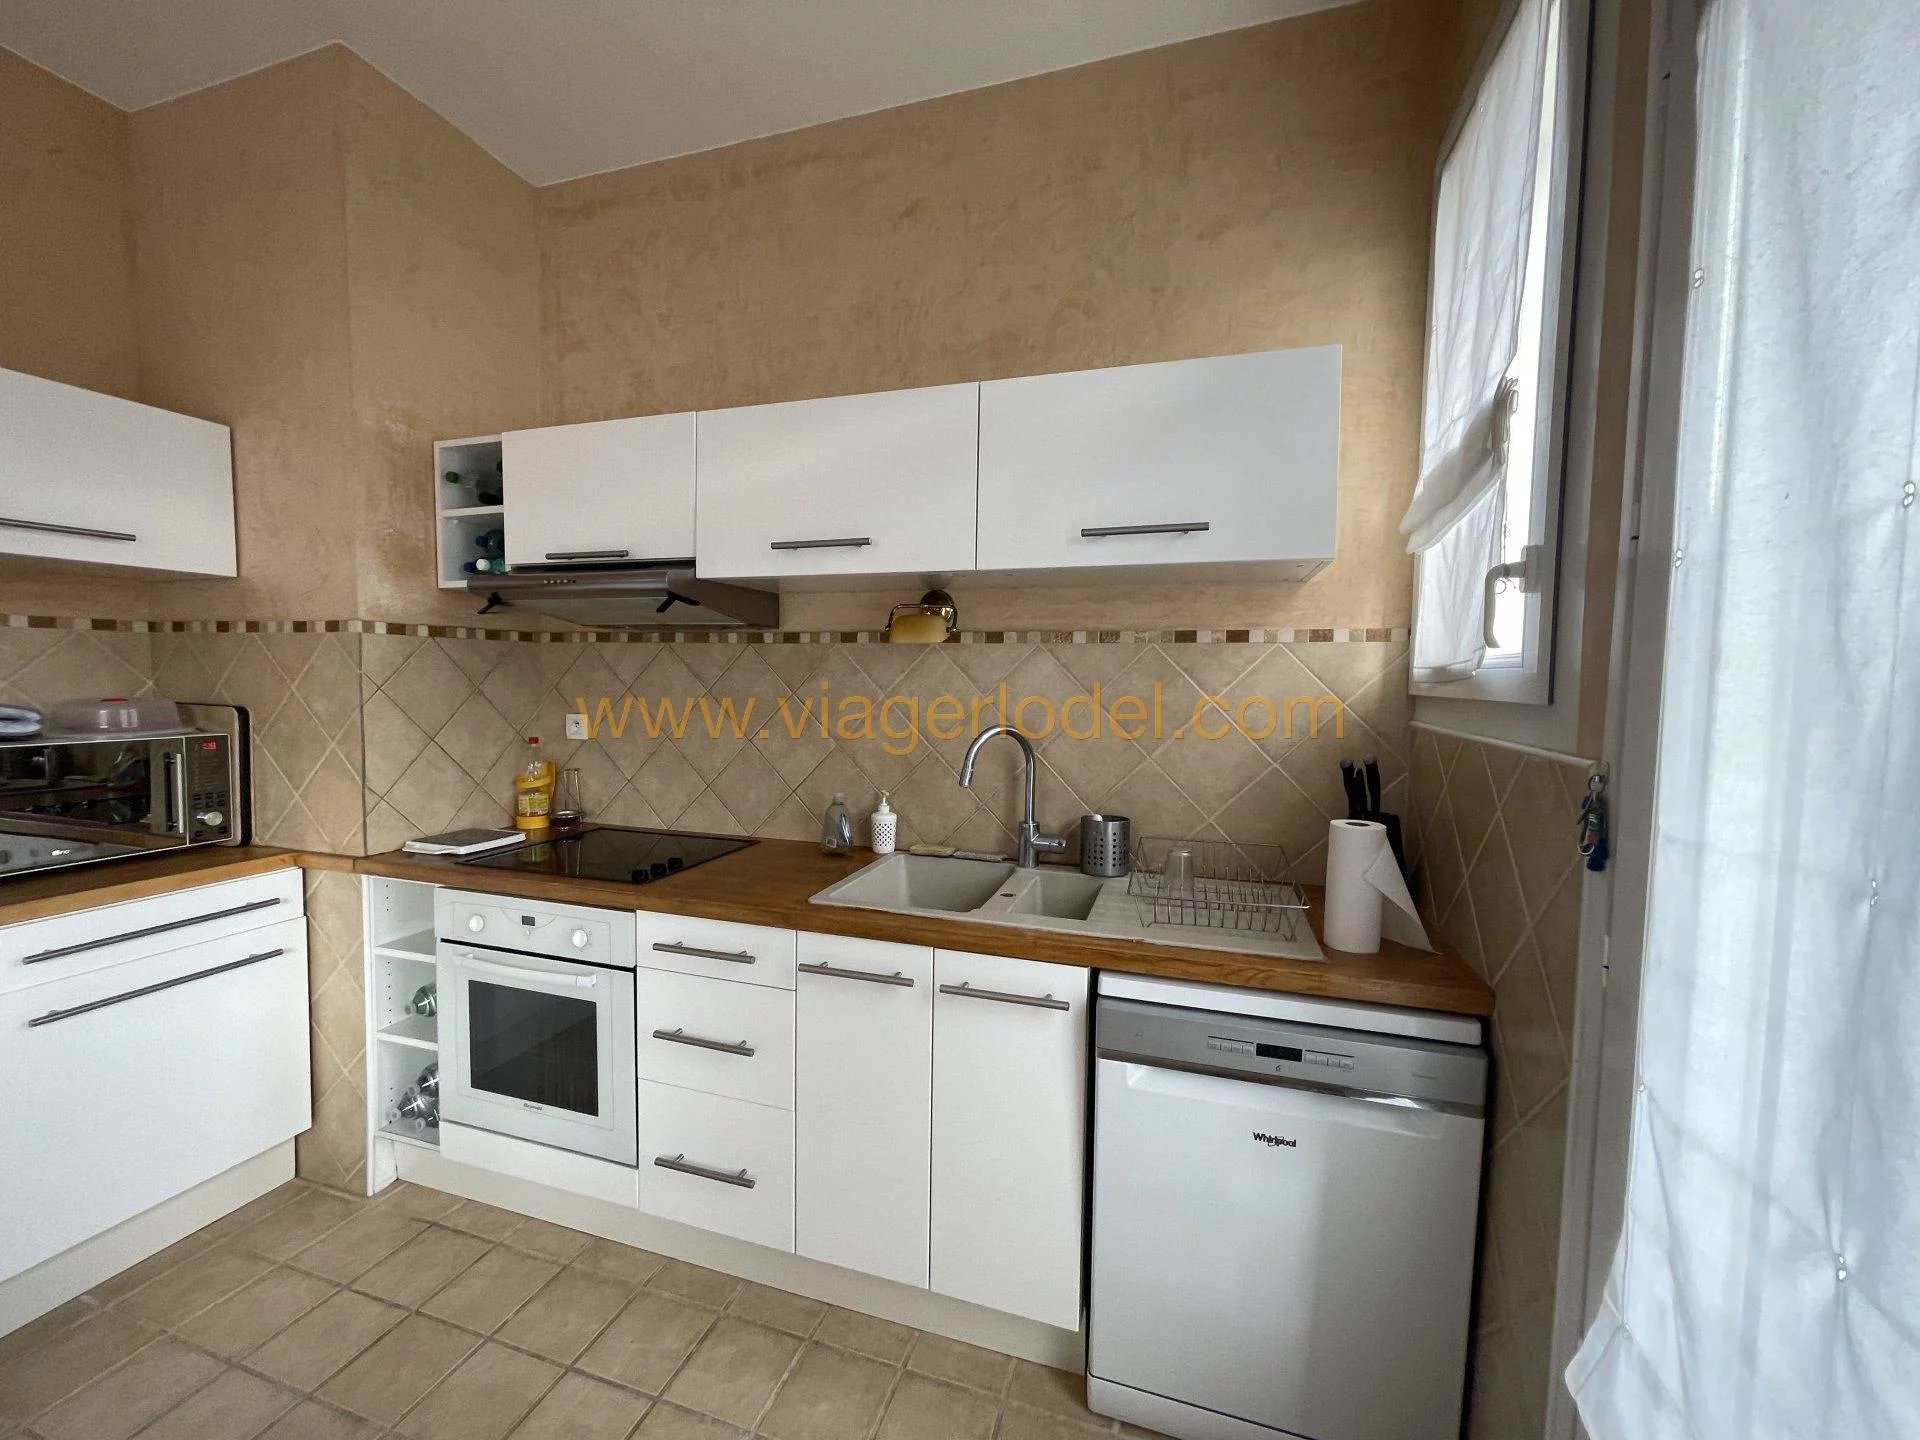 Ref. 9067 - BARE OWNERSHIP VACANT WITHIN 8 YEARS - ROYAN - Occupied house